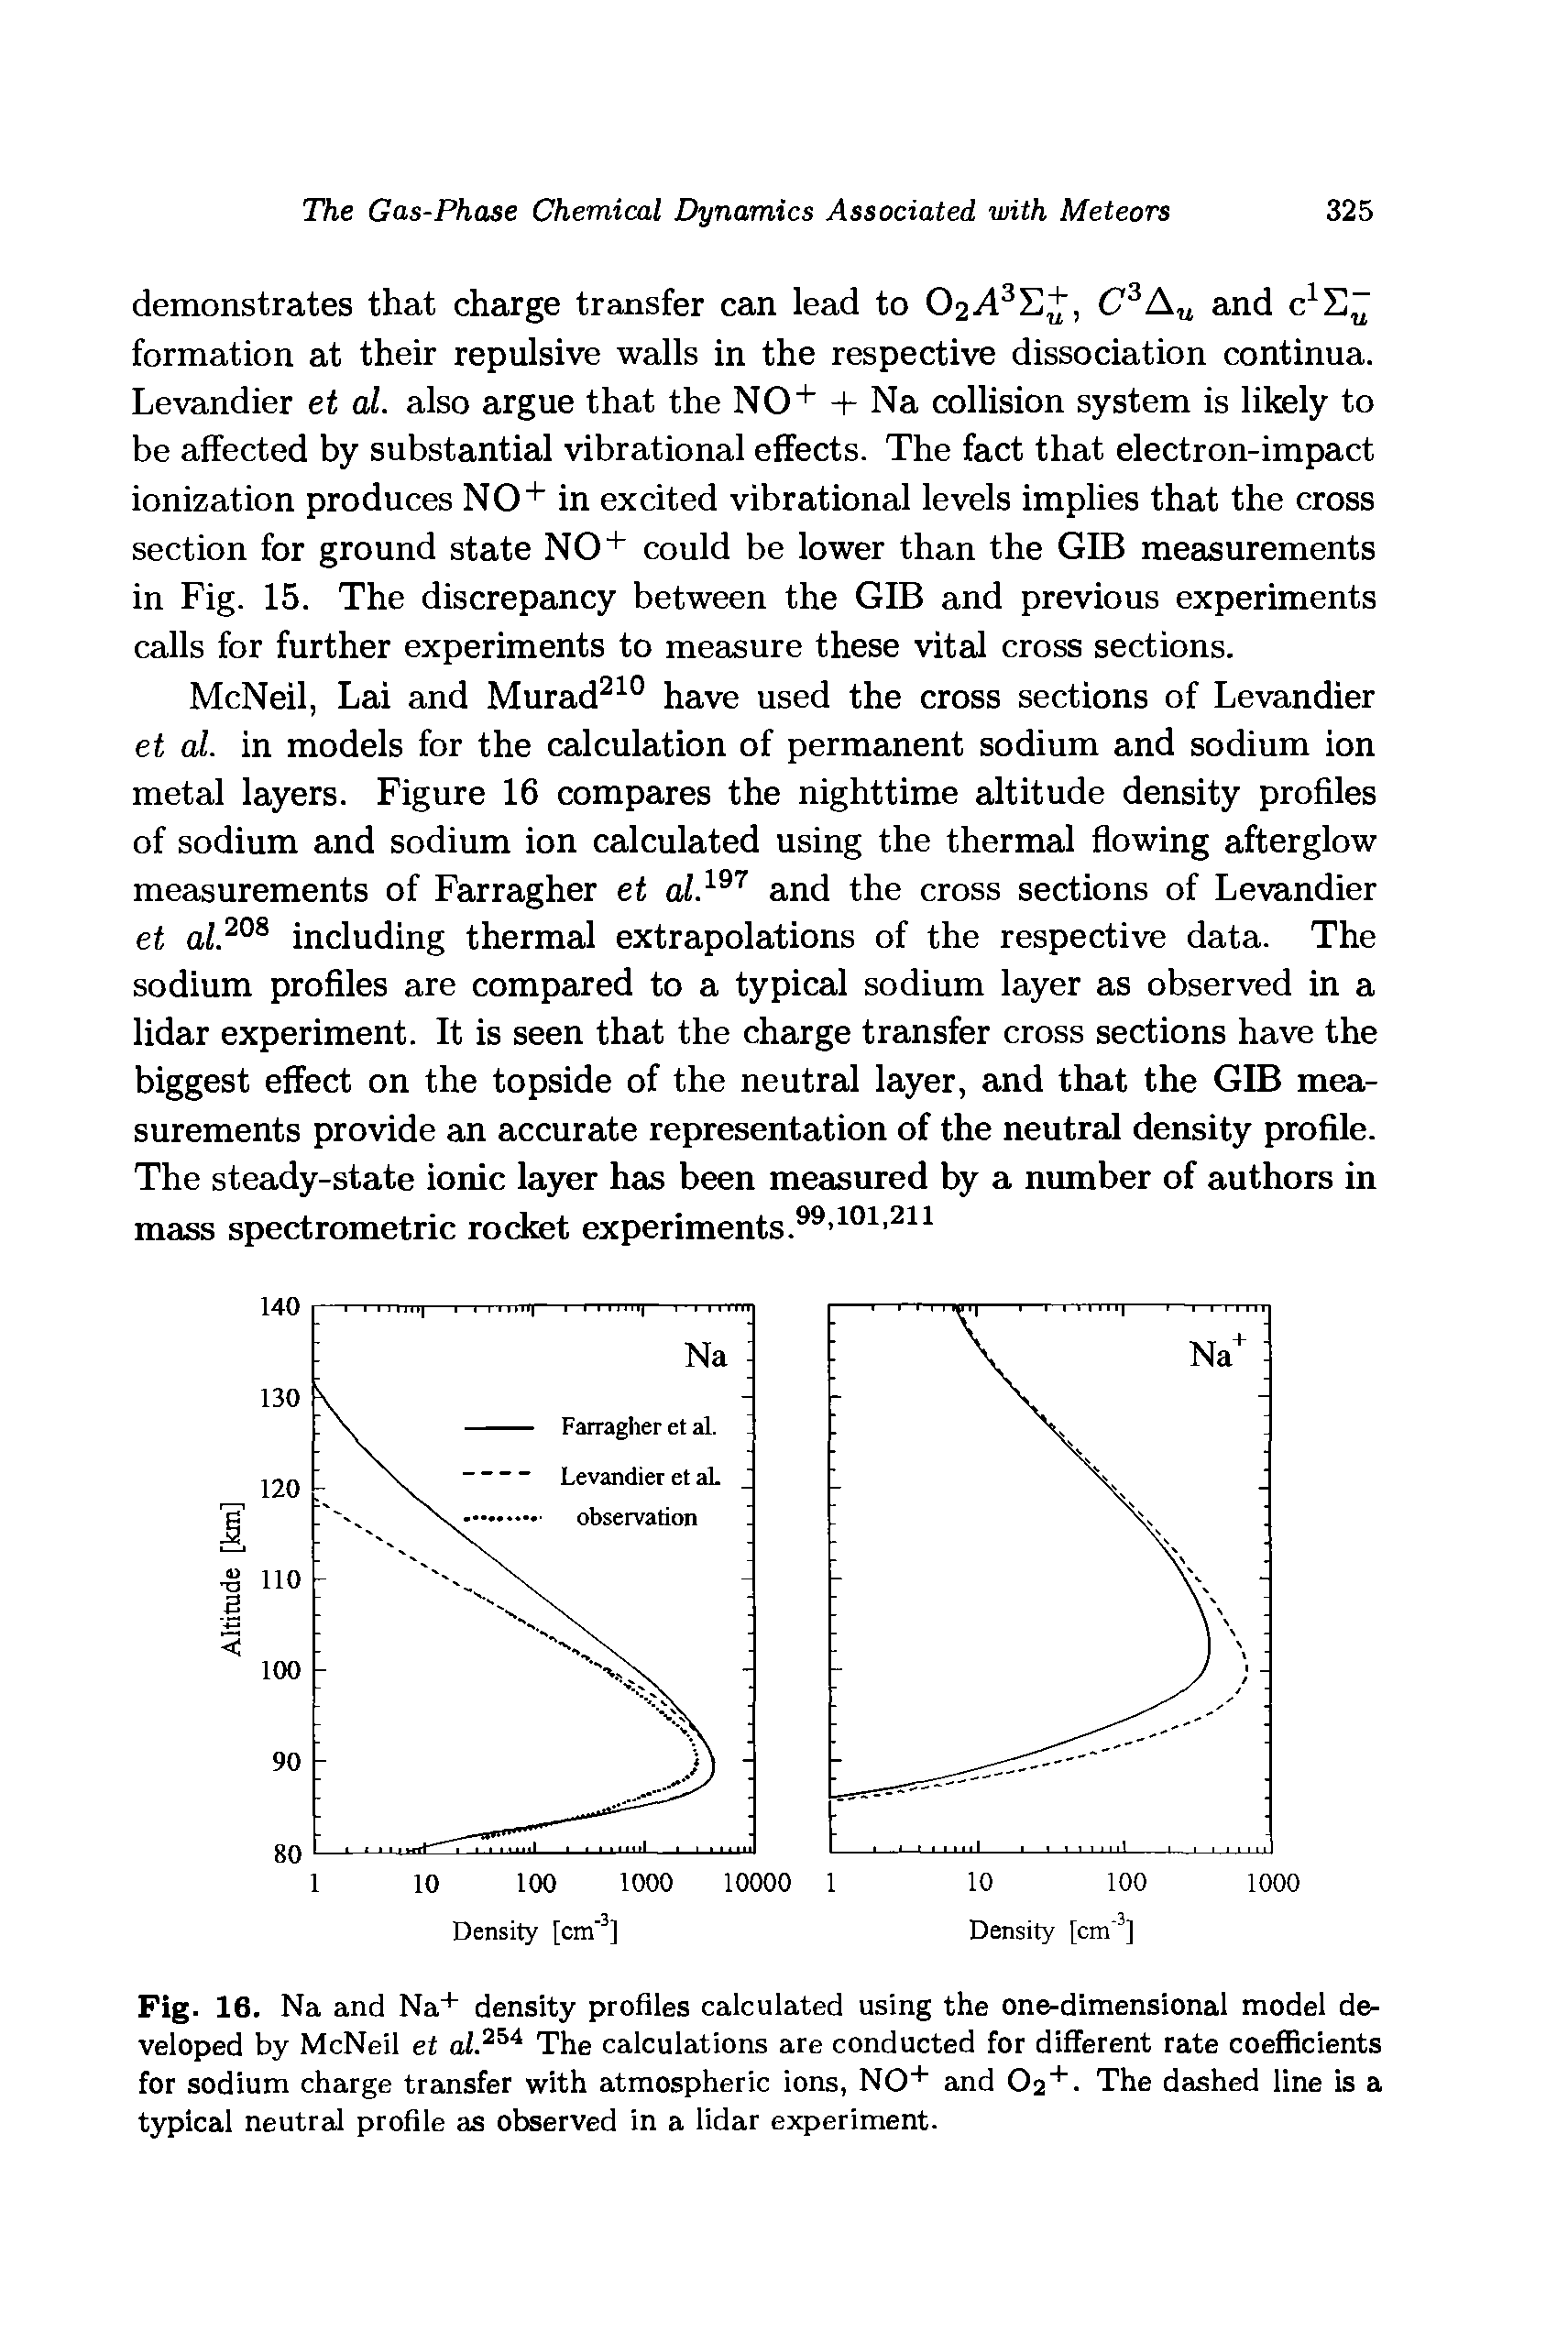 Fig. 16. Na and Na+ density profiles calculated using the one-dimensional model developed by McNeil et The calculations are conducted for different rate coefficients for sodium charge transfer with atmospheric ions, NO" " and O2. The dashed line is a typical neutral profile as observed in a lidar experiment.